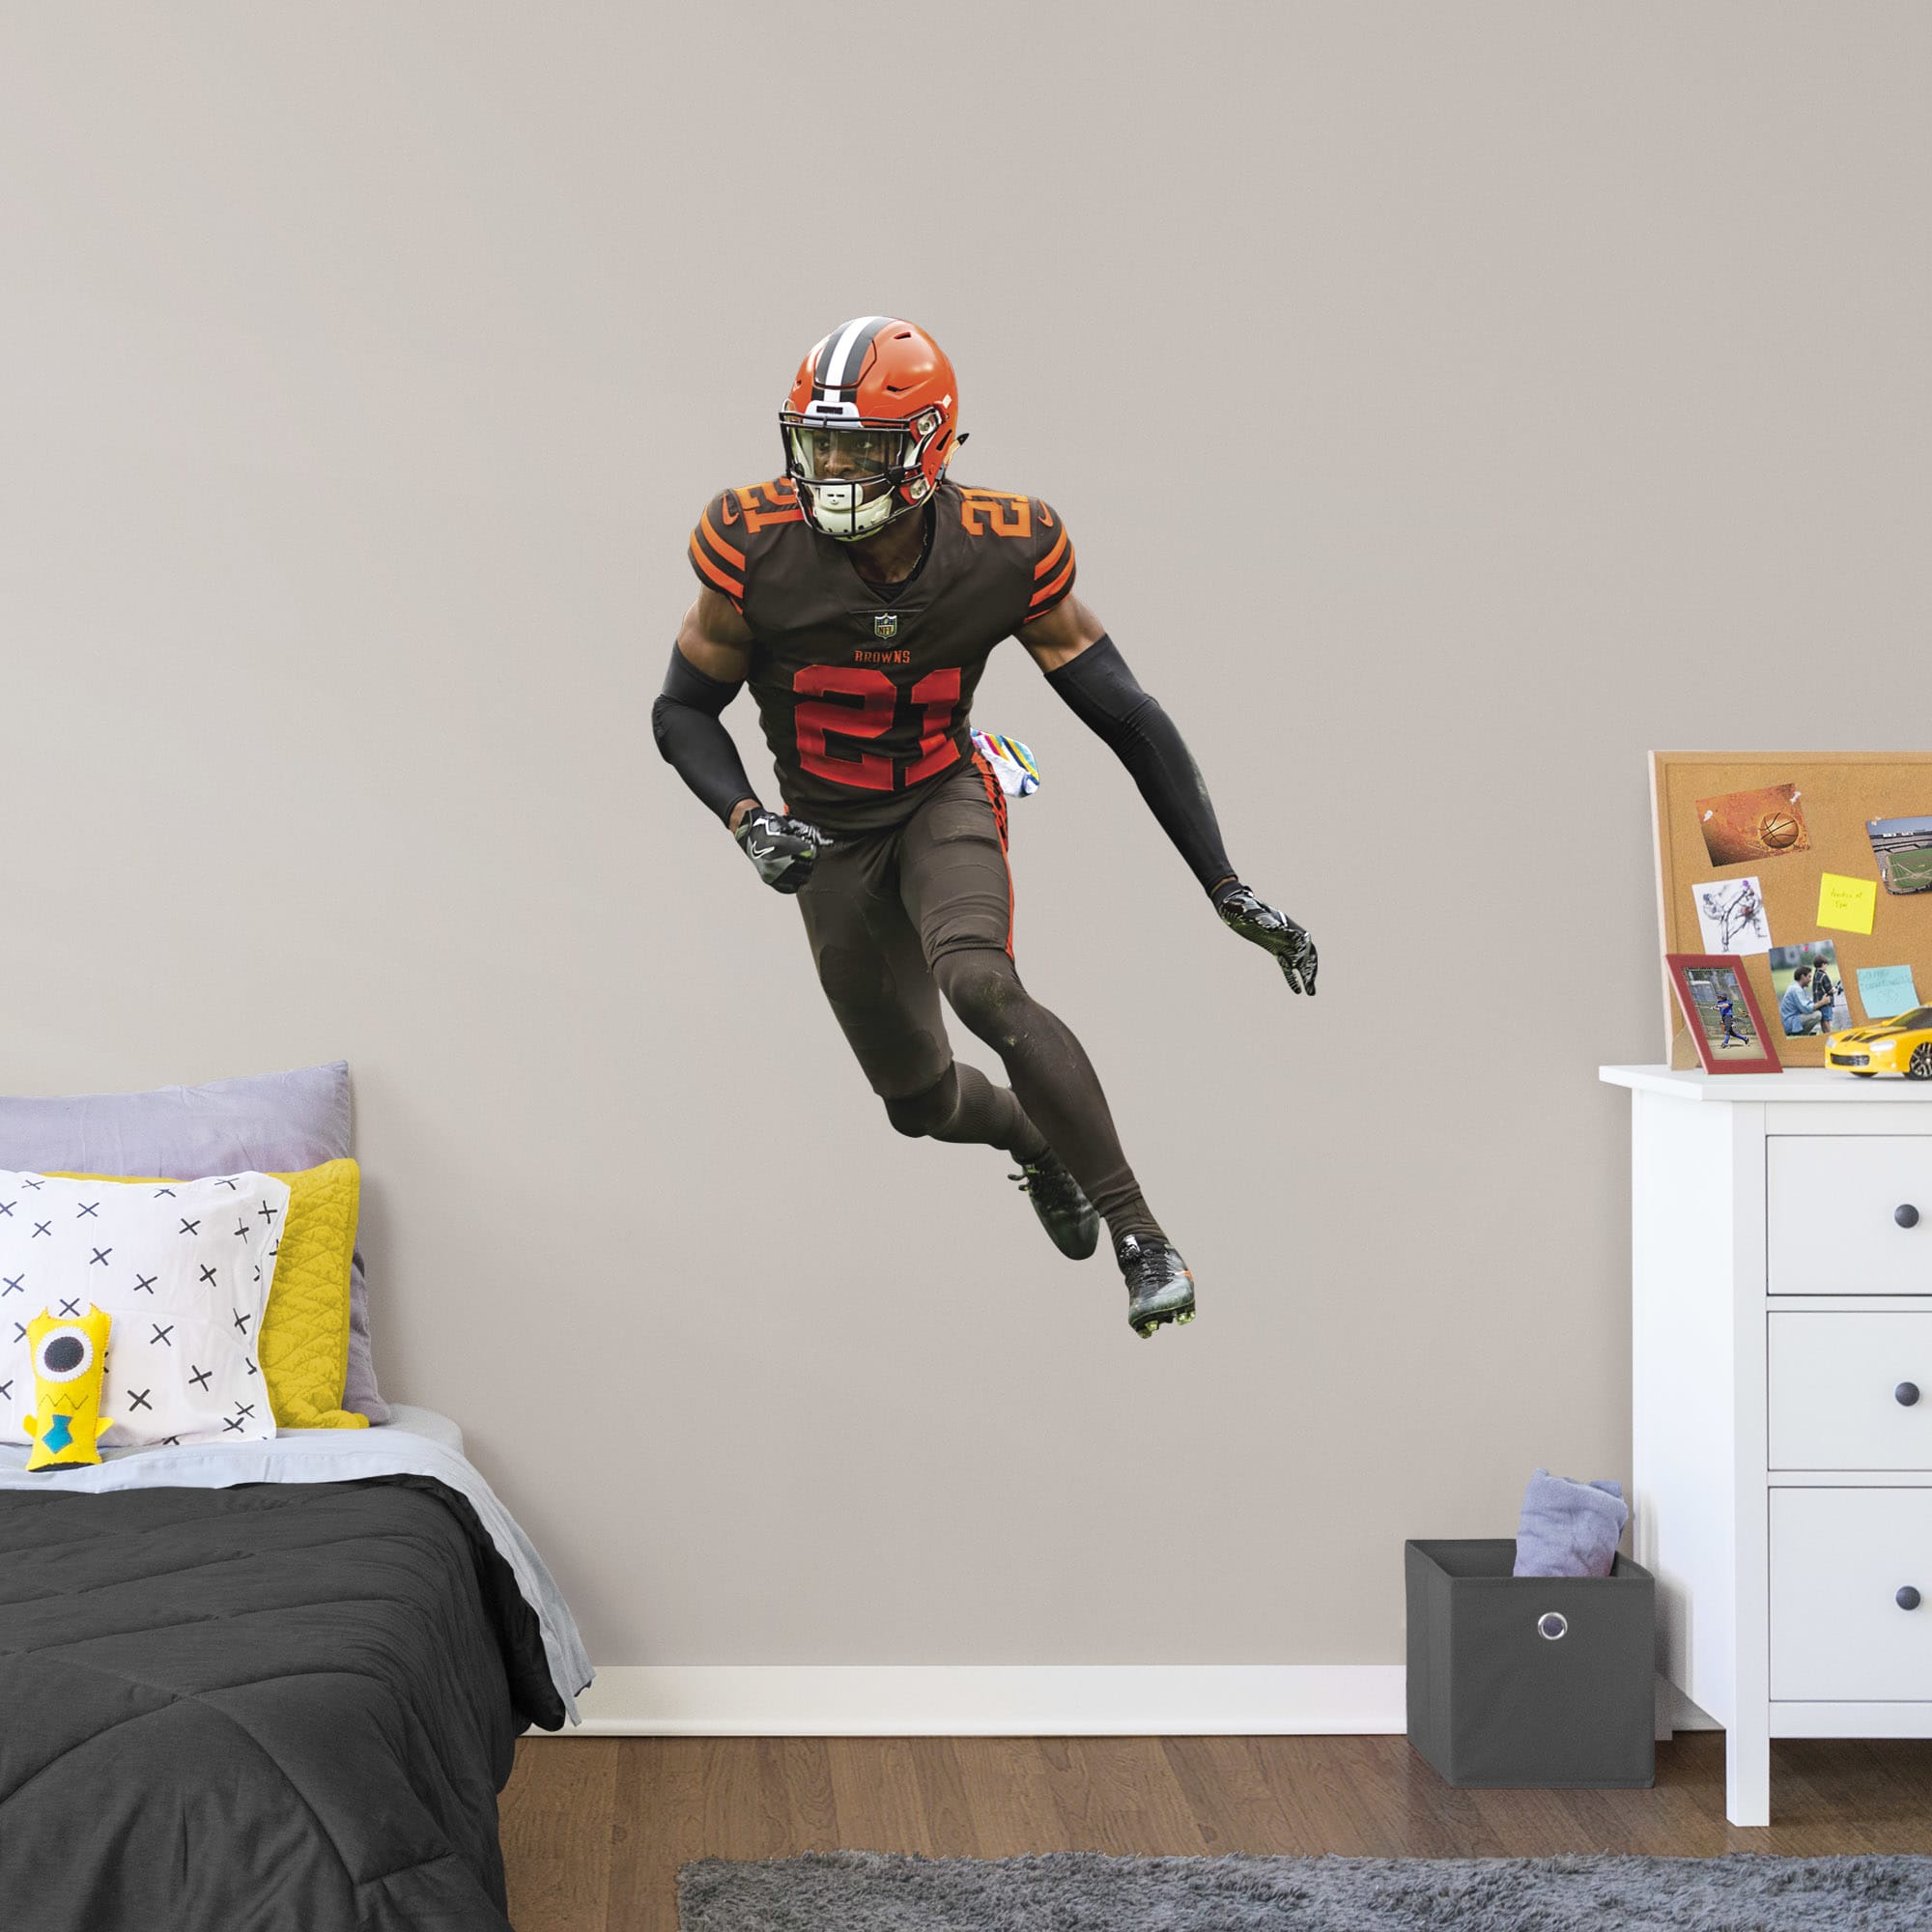 Denzel Ward for Cleveland Browns - Officially Licensed NFL Removable Wall Decal Giant Athlete + 2 Decals (33"W x 51"H) by Fathea